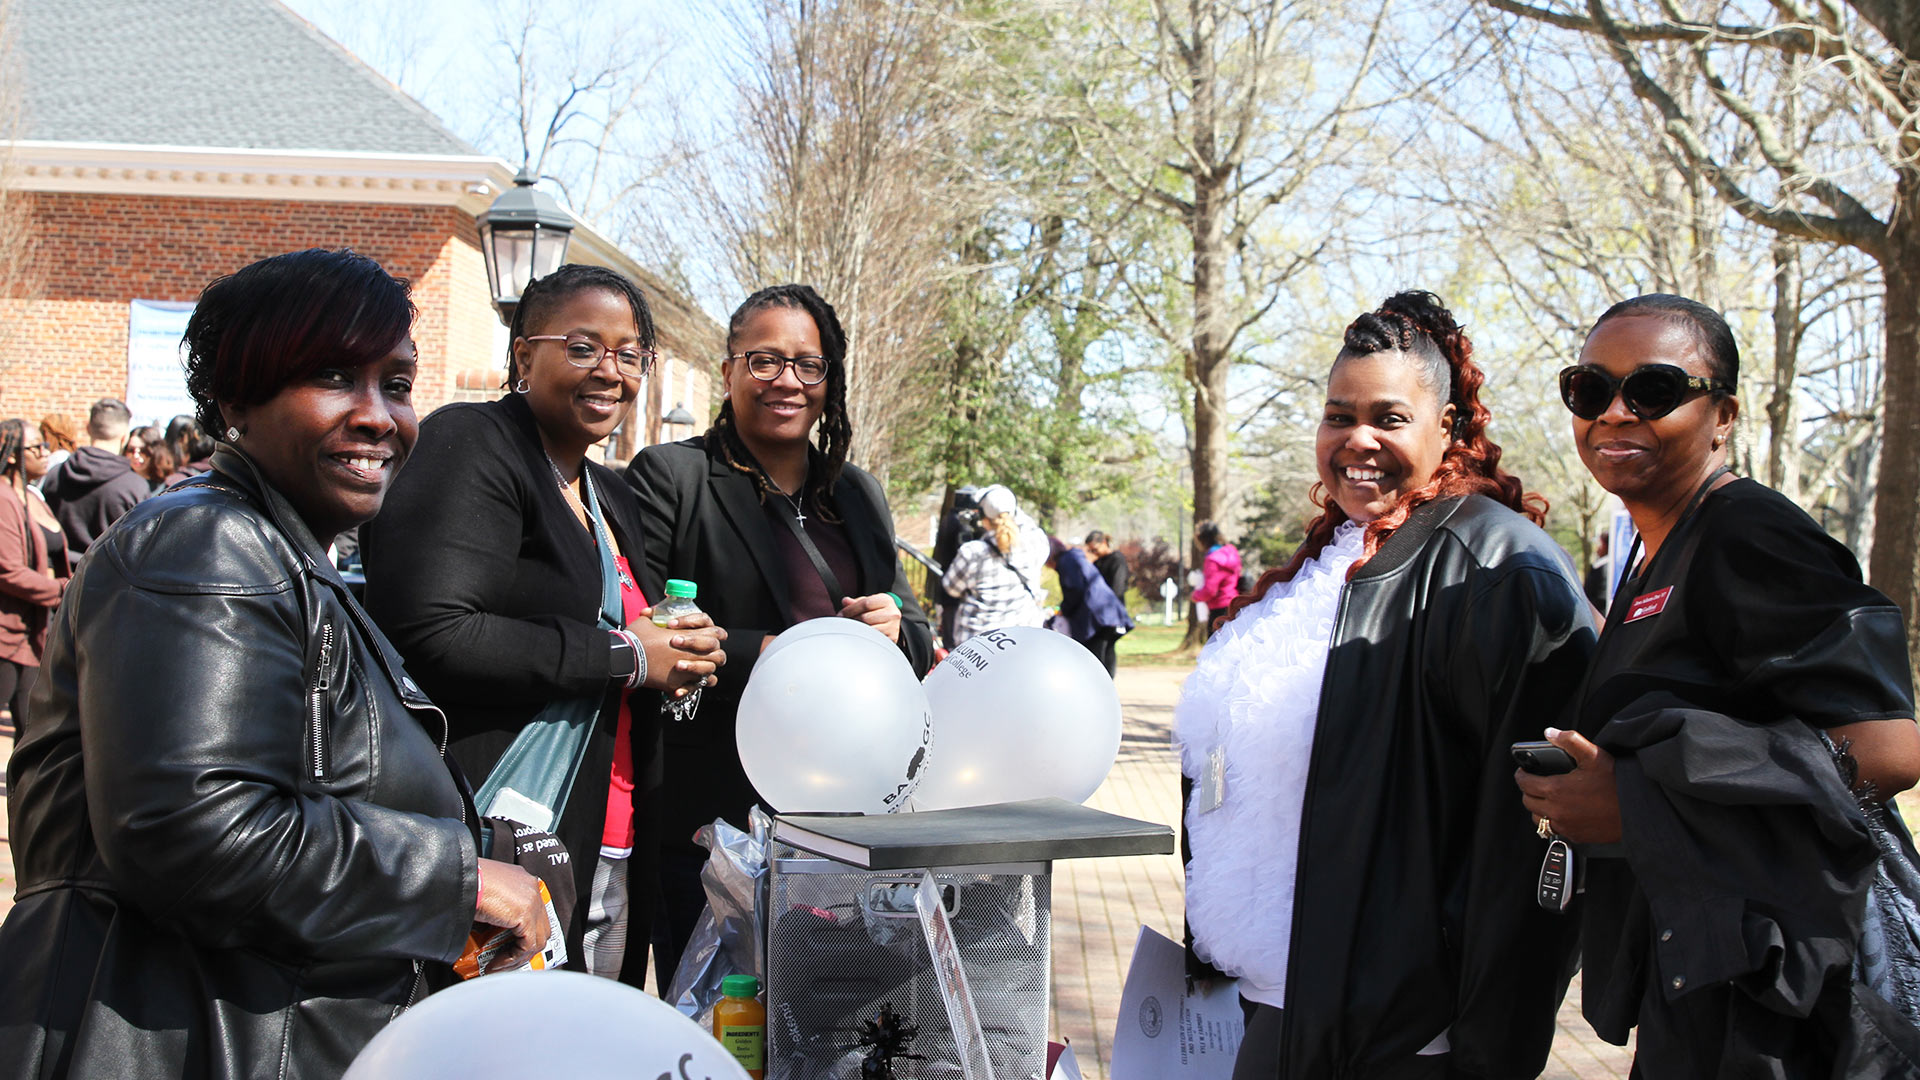 Members of Black Alumni of Guilford College gathered in front of Founders Hall.